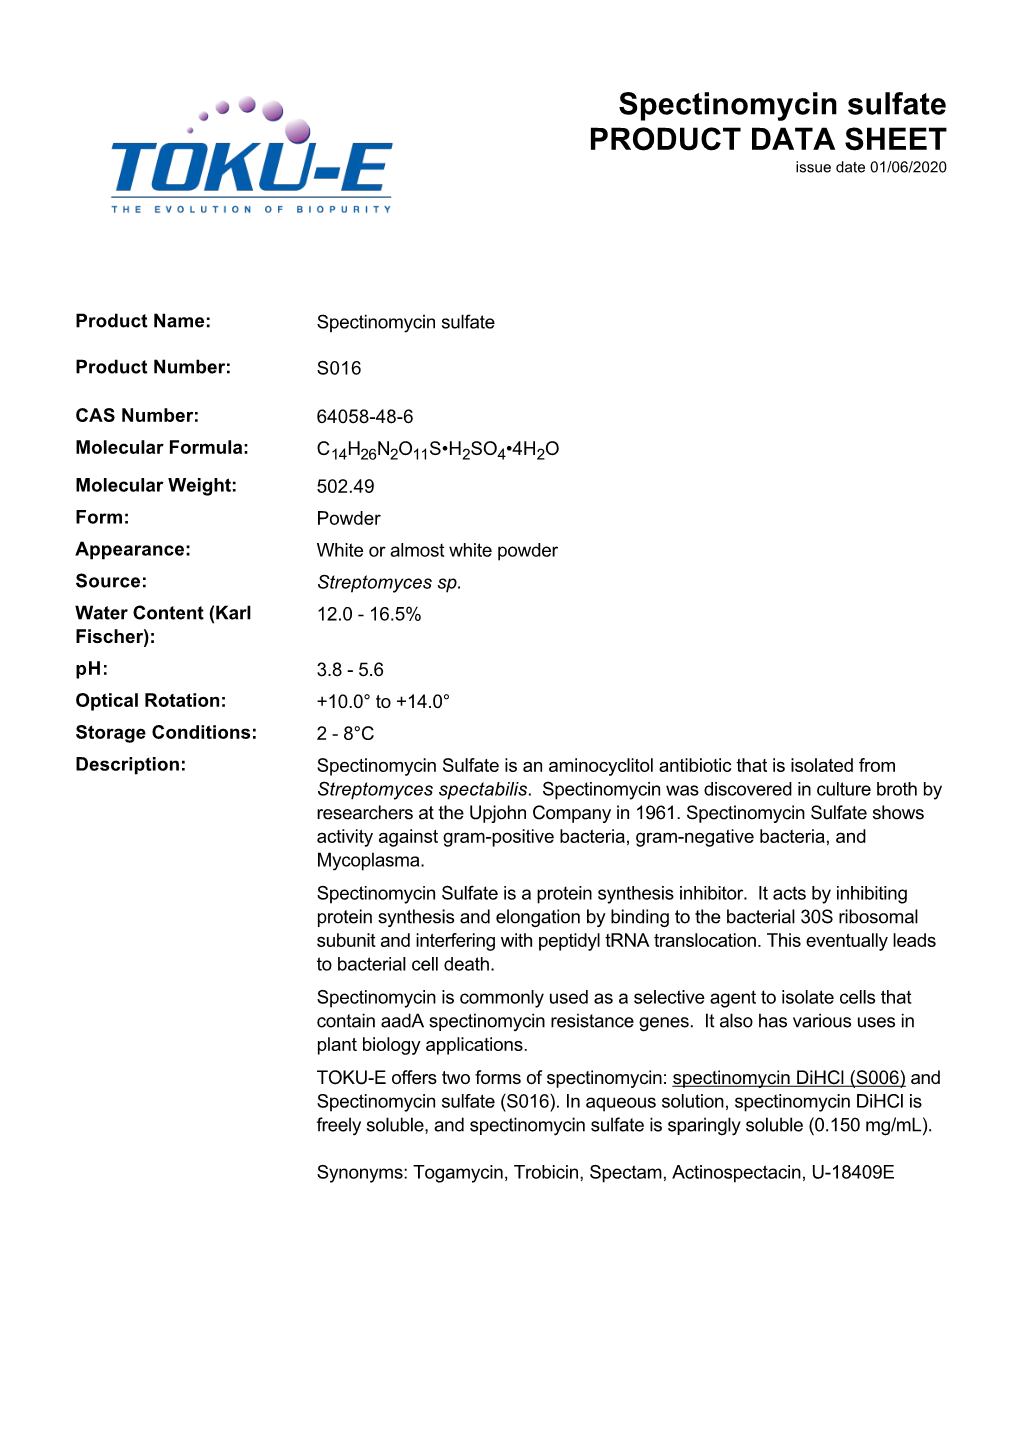 Spectinomycin Sulfate PRODUCT DATA SHEET Issue Date 01/06/2020